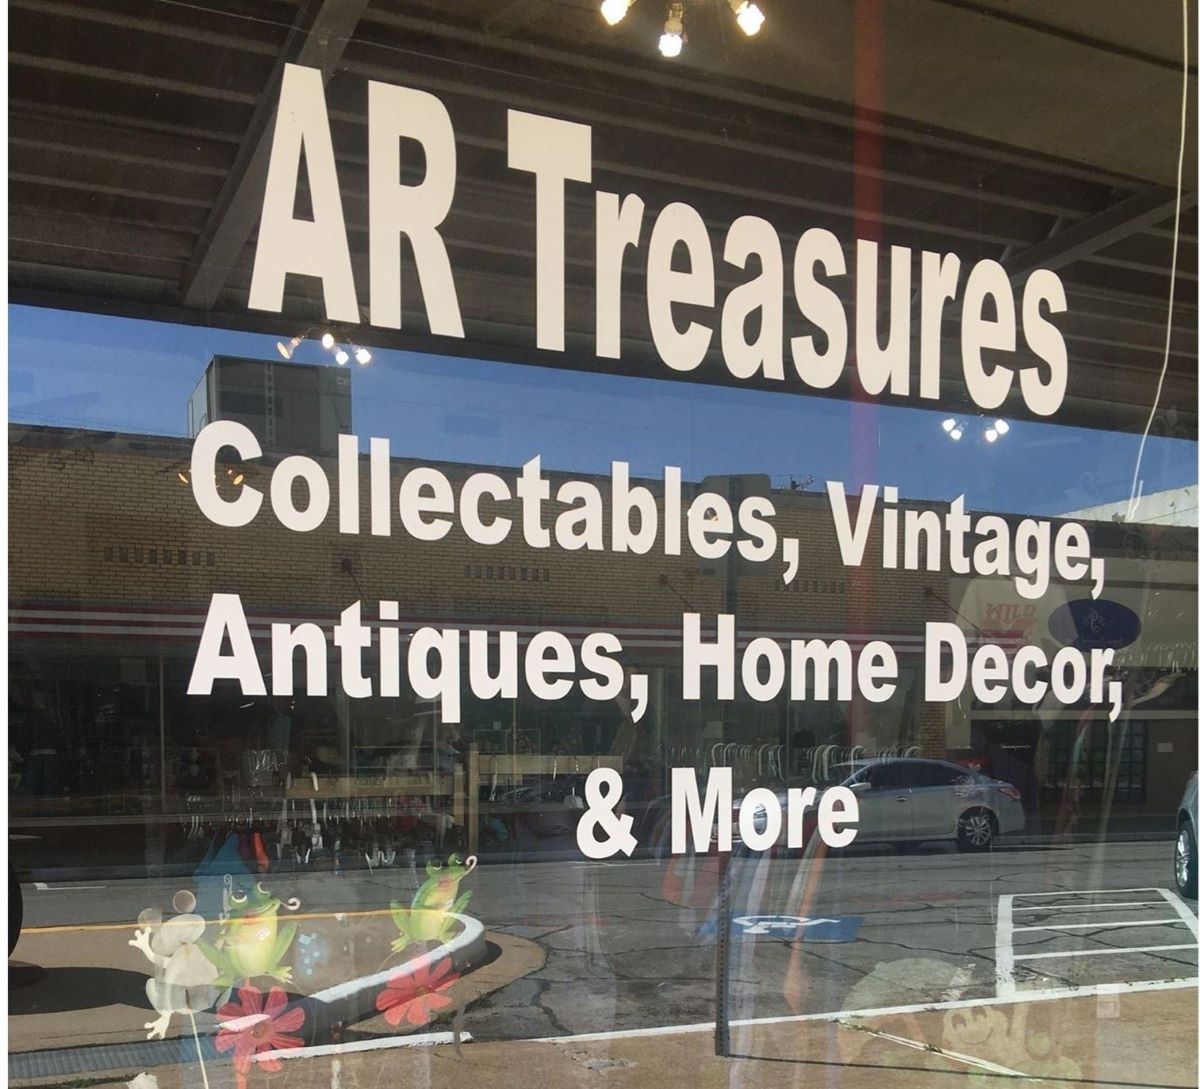 Palestine, Texas Grant Program Makes AR Treasures the Coolest Place to Shop in Town Photo - Click Here to See